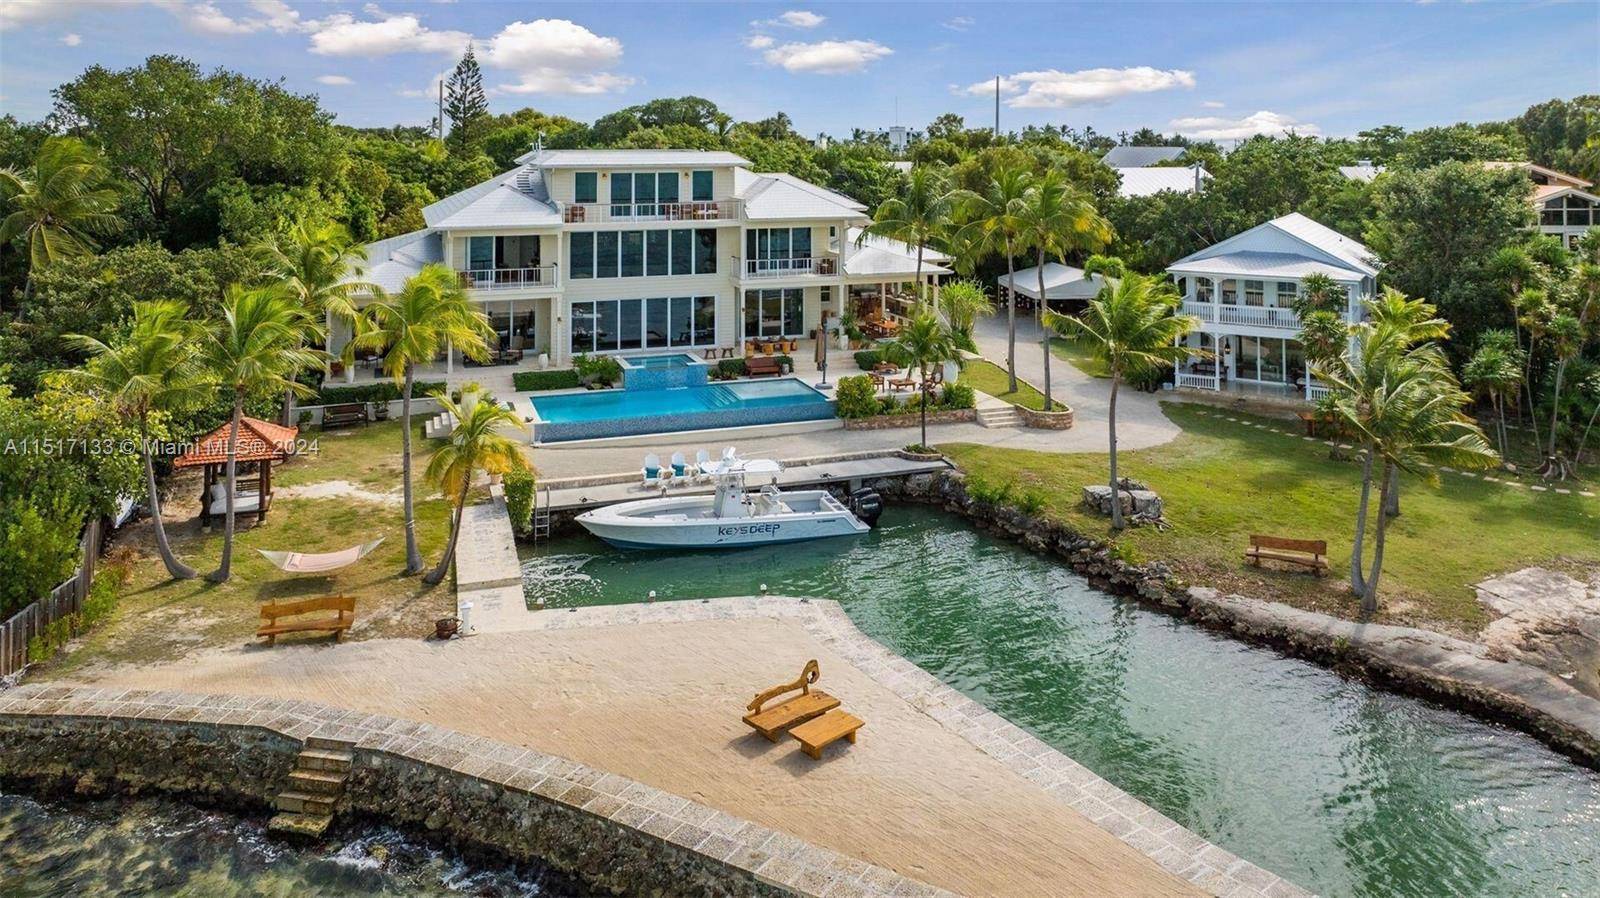 SERENITY CAY is an unparalleled and extraordinary estate nestled in the heart of Islamorada.